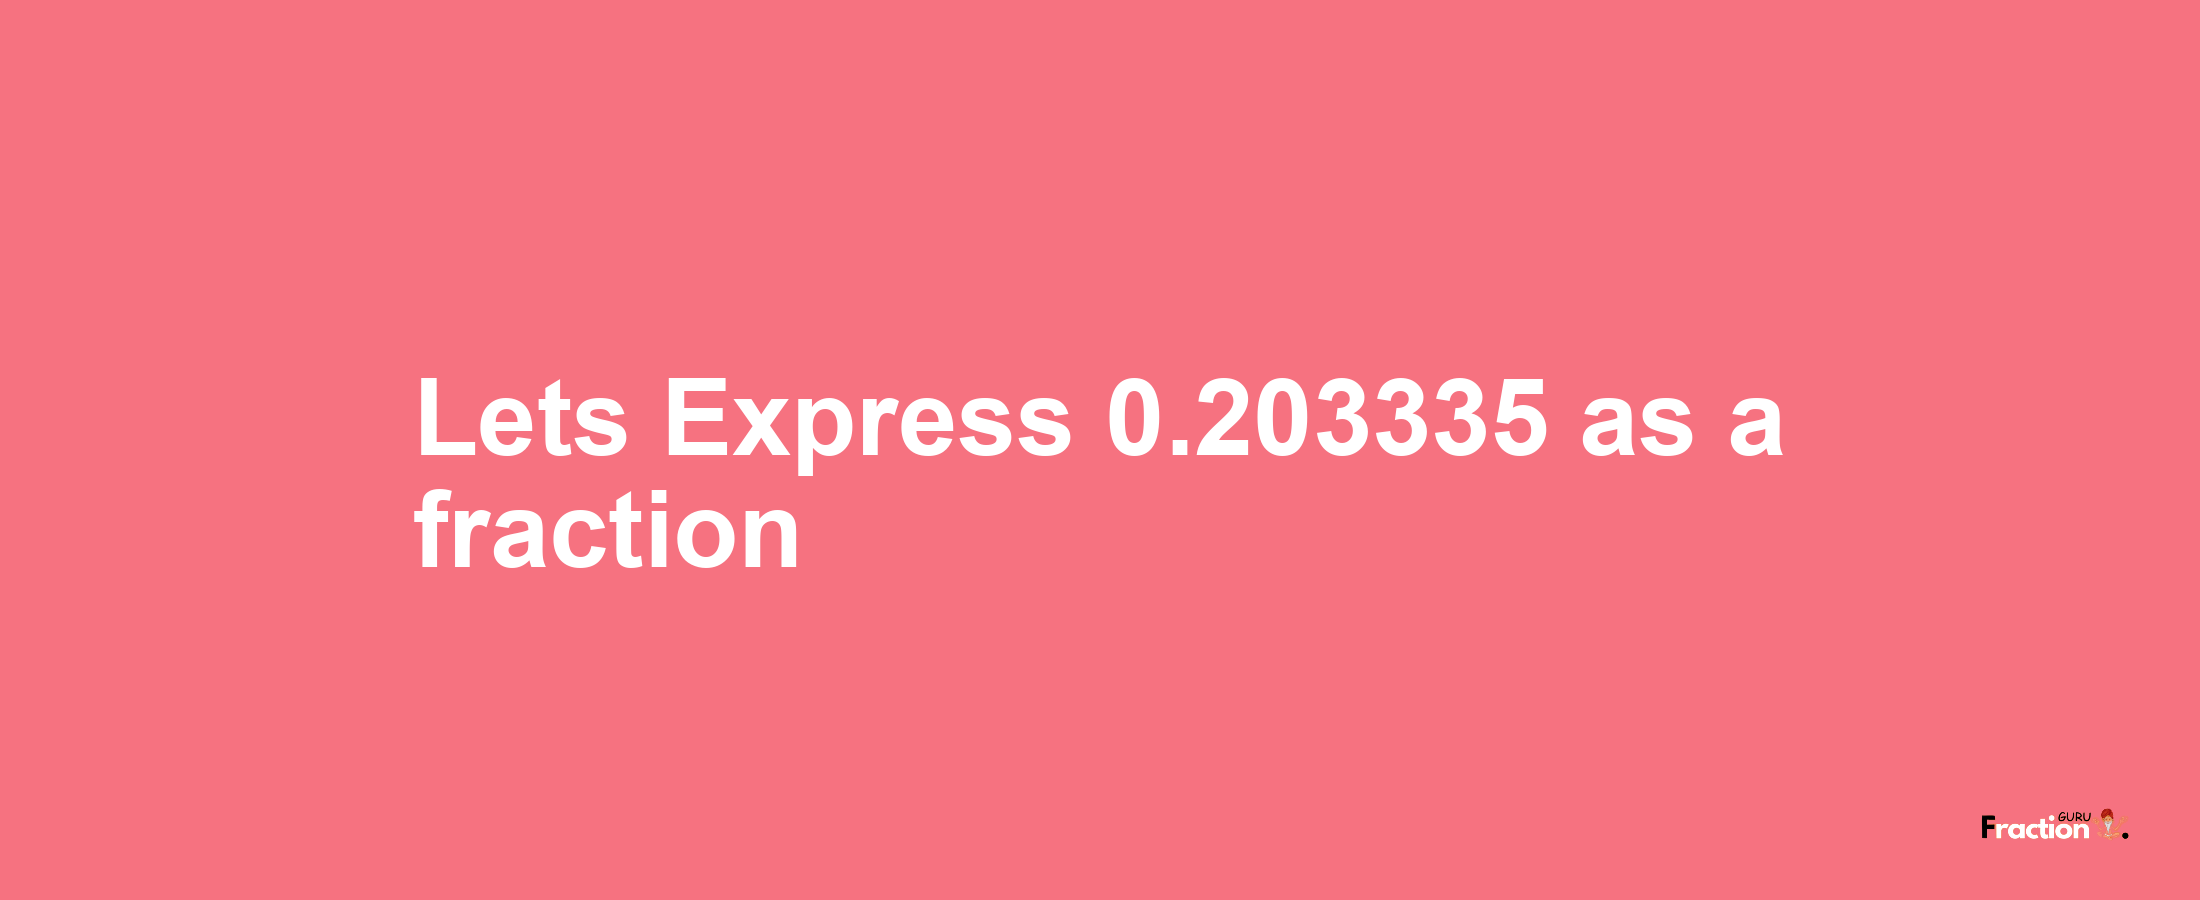 Lets Express 0.203335 as afraction